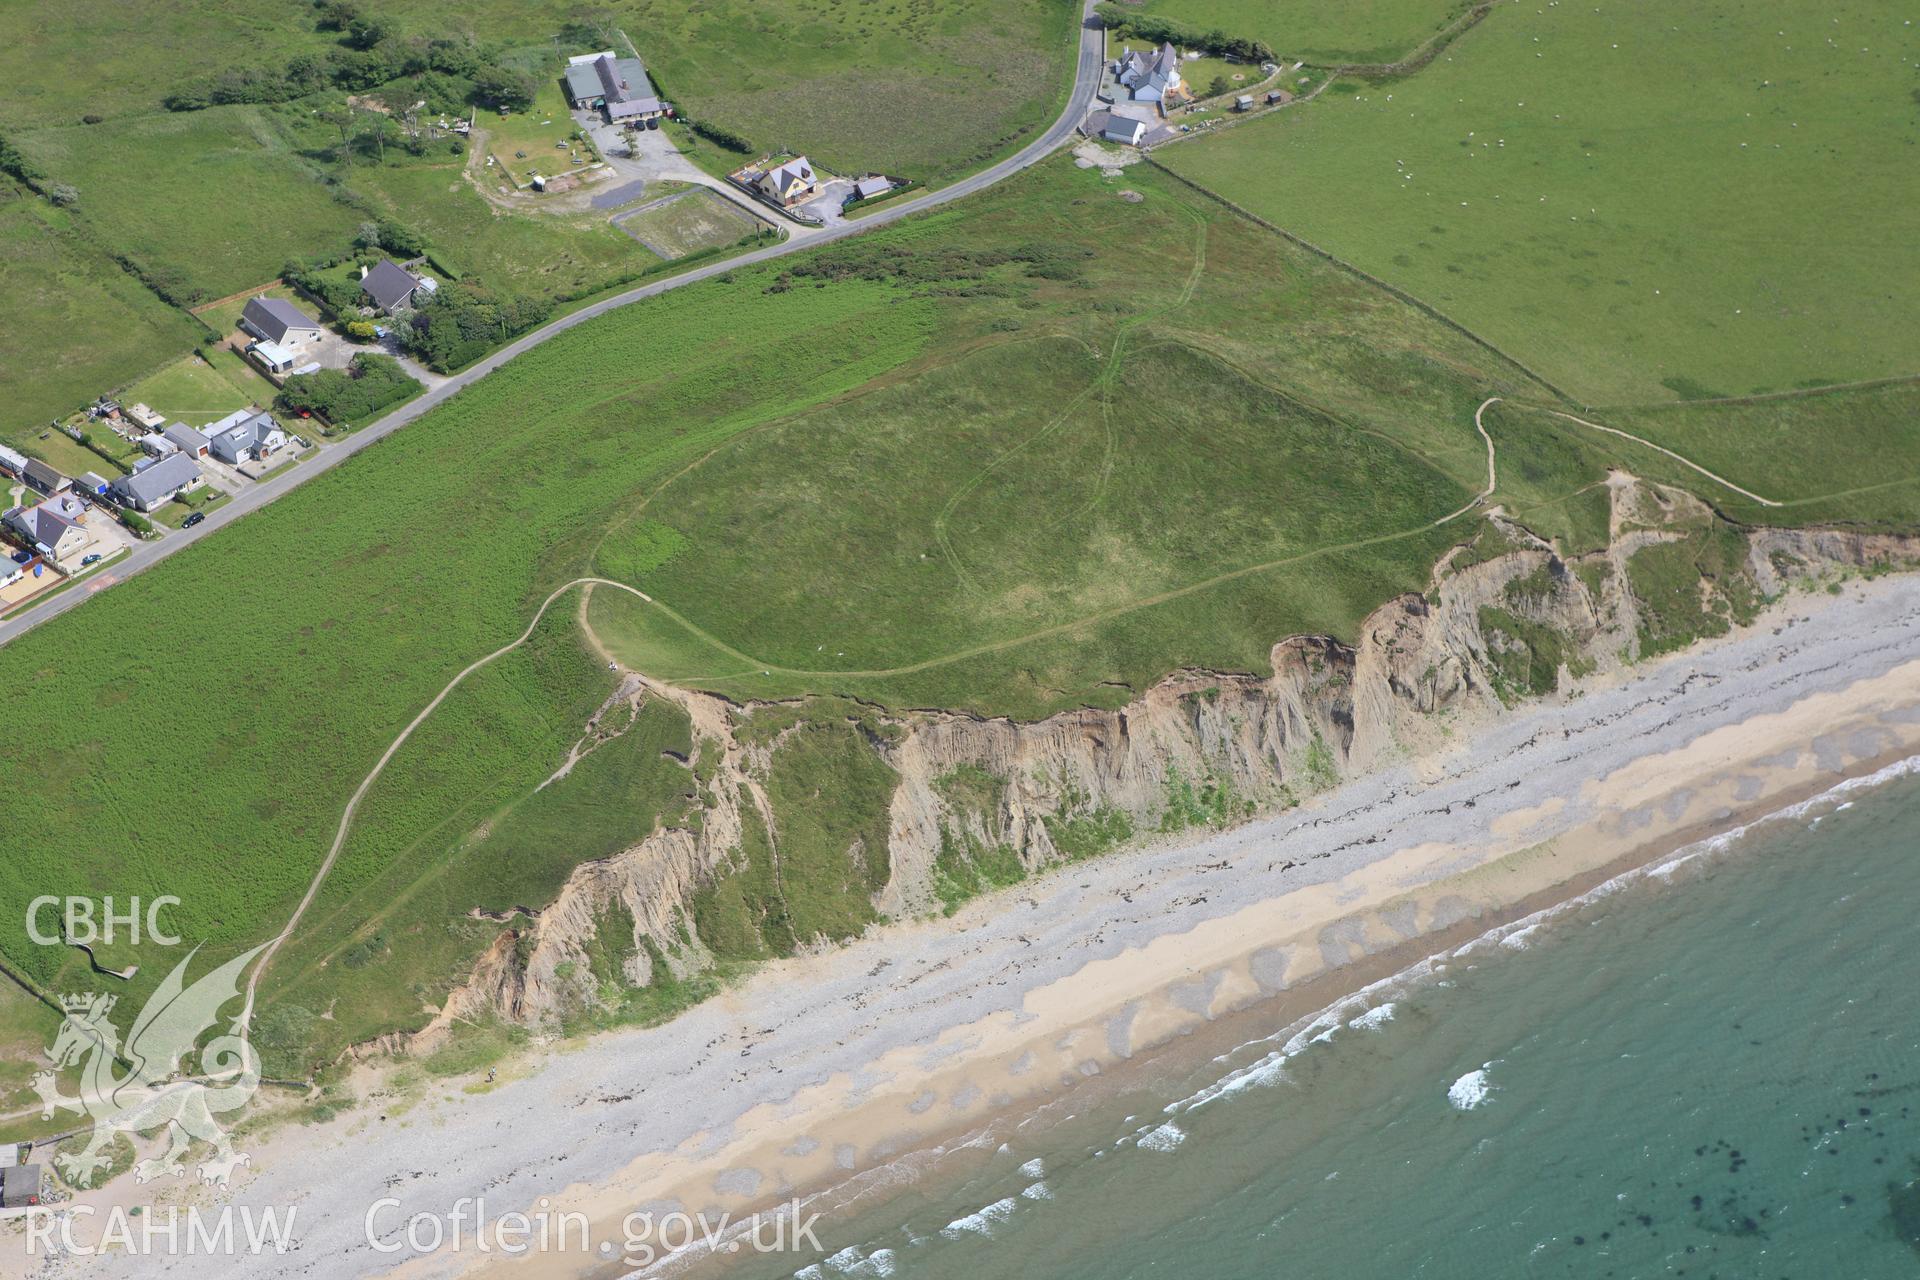 RCAHMW colour oblique aerial photograph of Dinas Dinlle Hillfort, Llandwrog. Taken on 16 June 2009 by Toby Driver